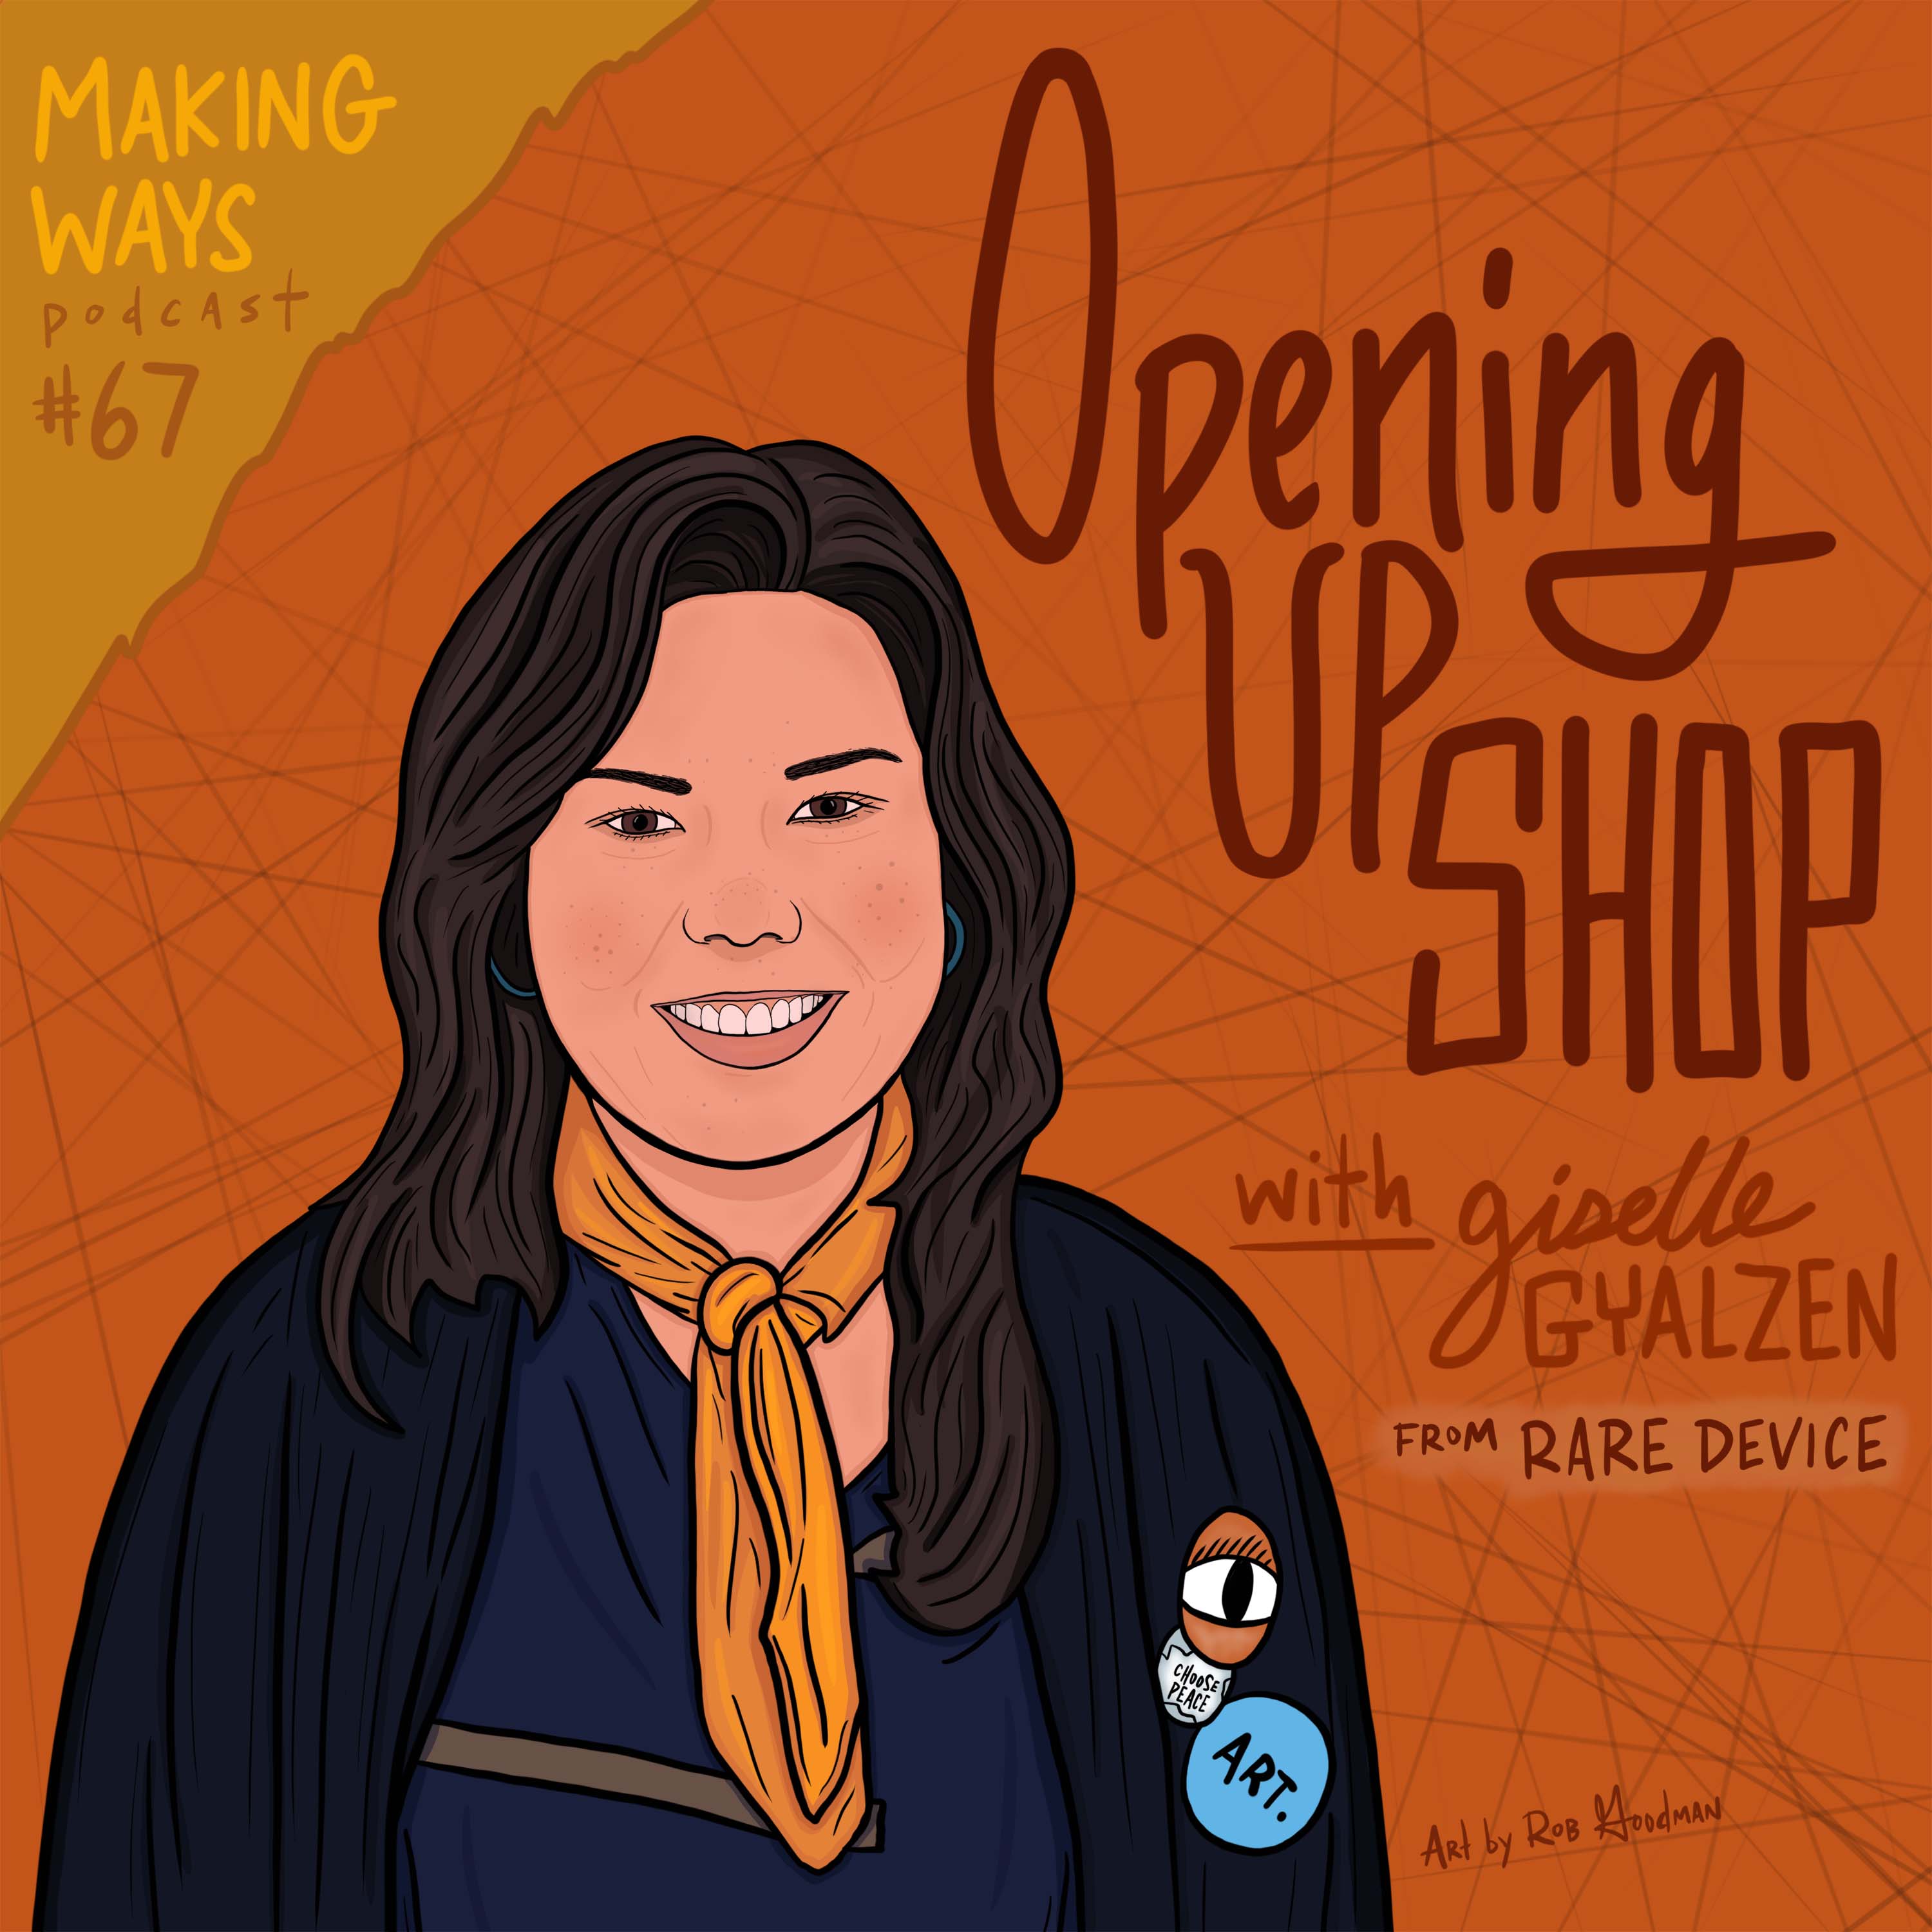 Opening Up Shop with Giselle Gyalzen from Rare Device